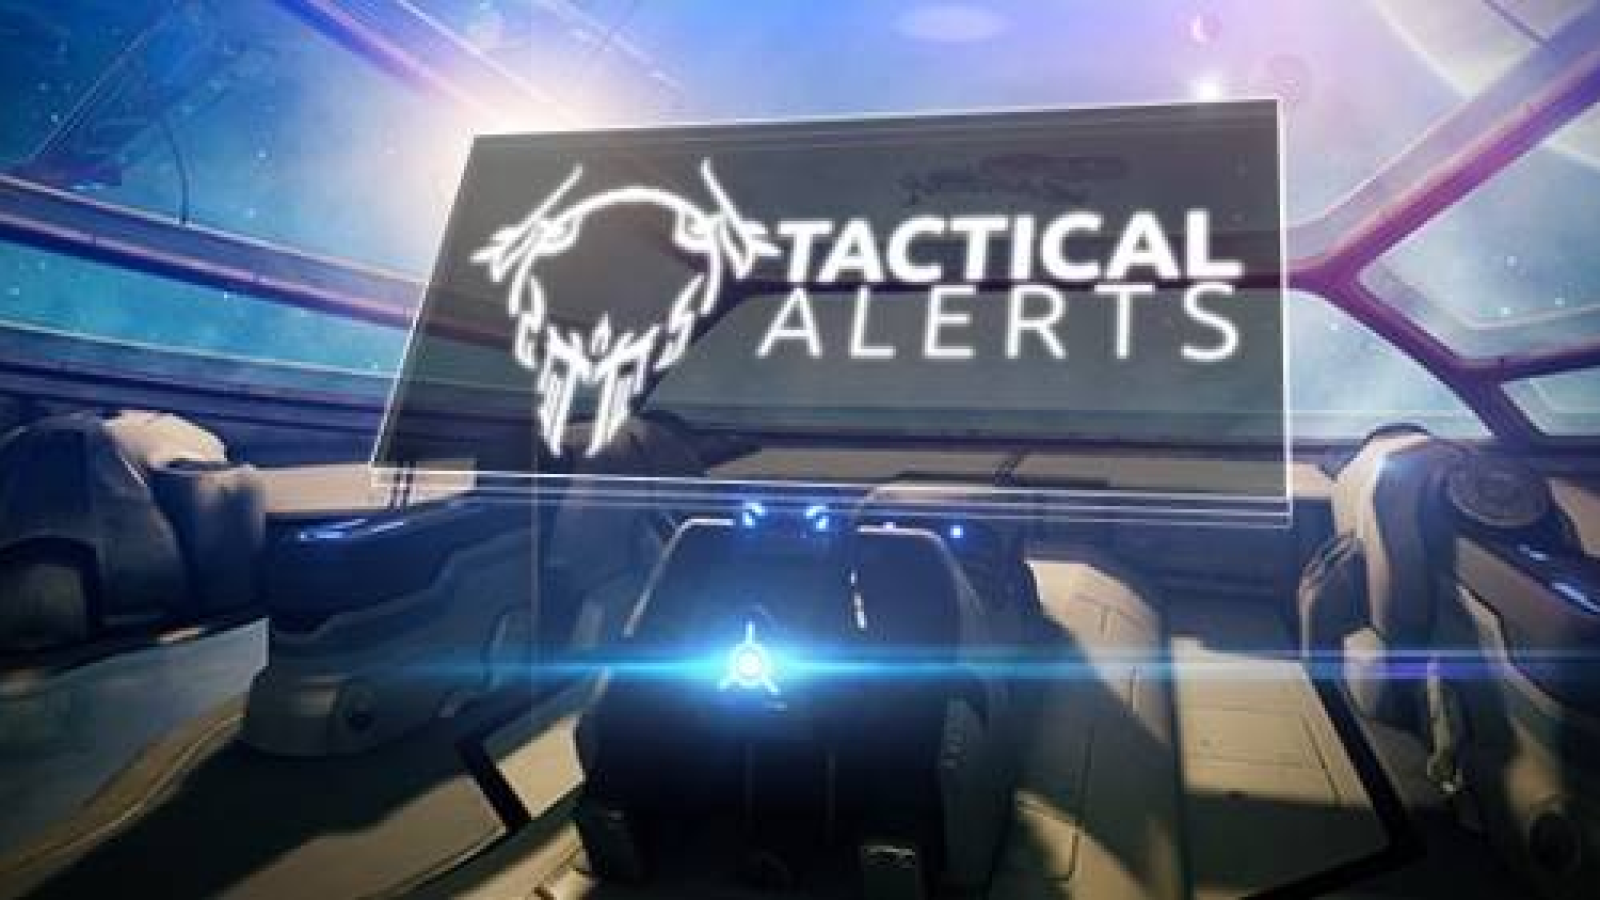 Tactical Alerts are coming!